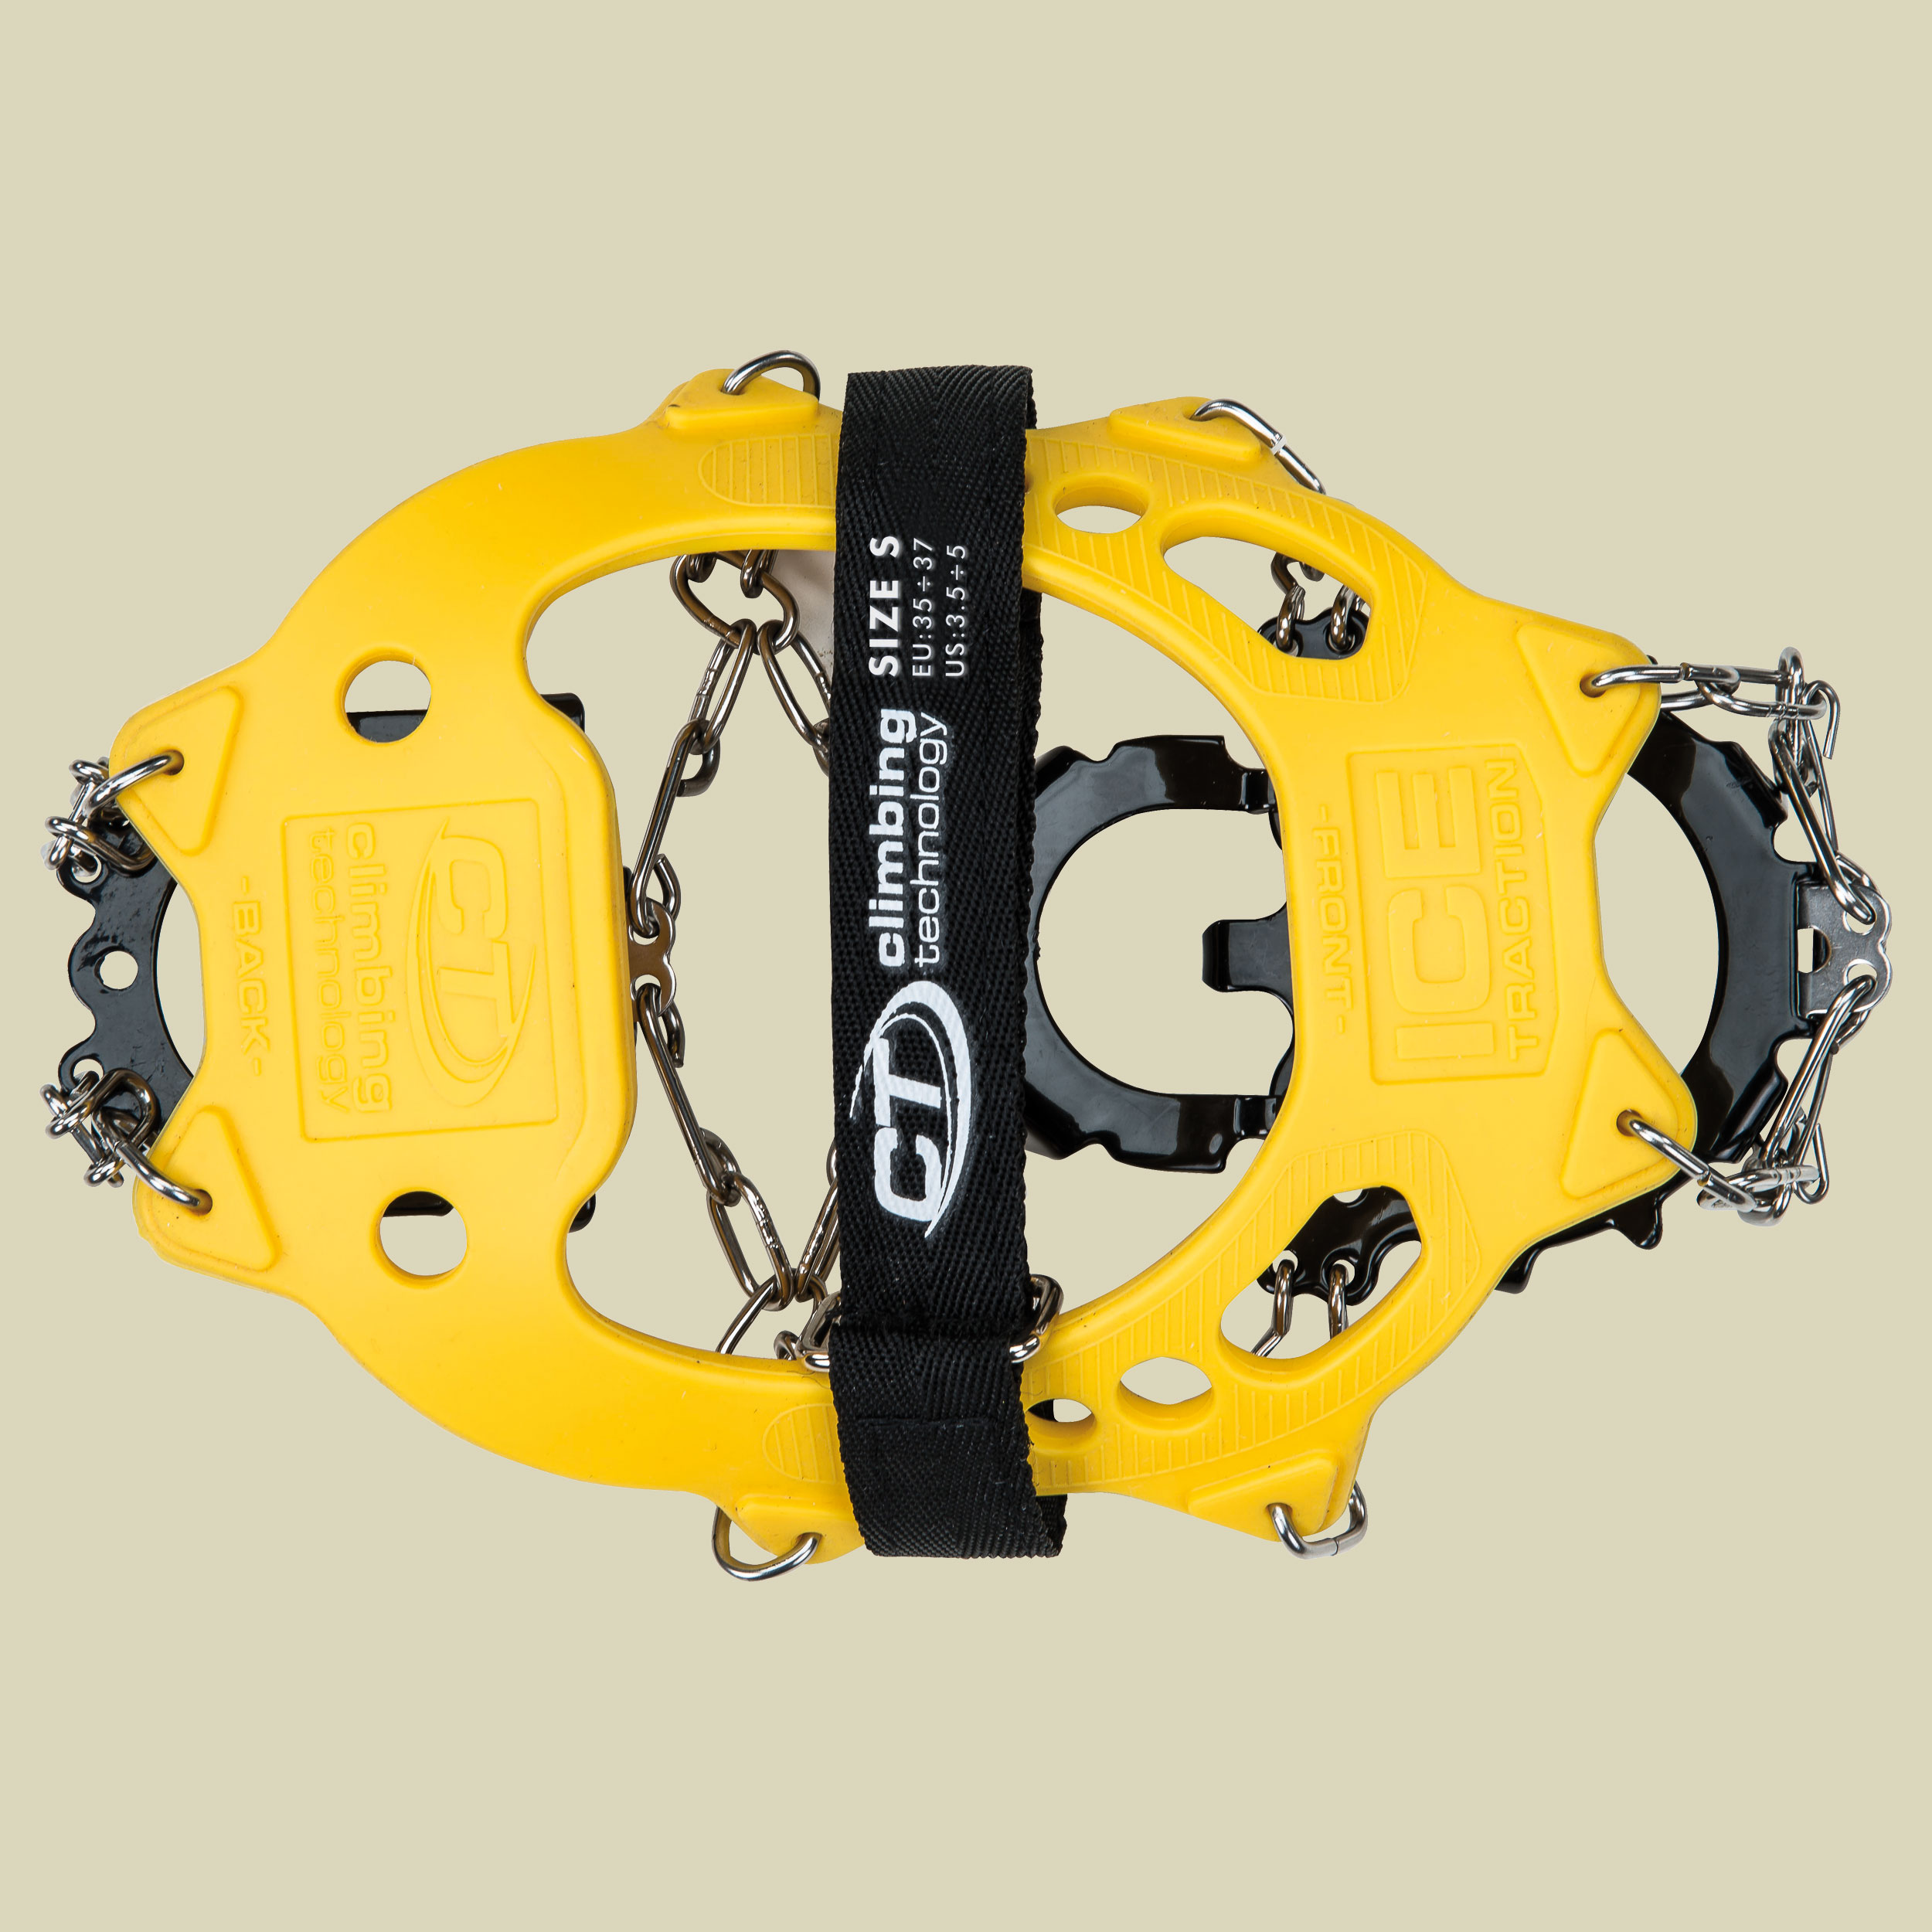 Ice Traction Crampons Größe S Farbe yellow